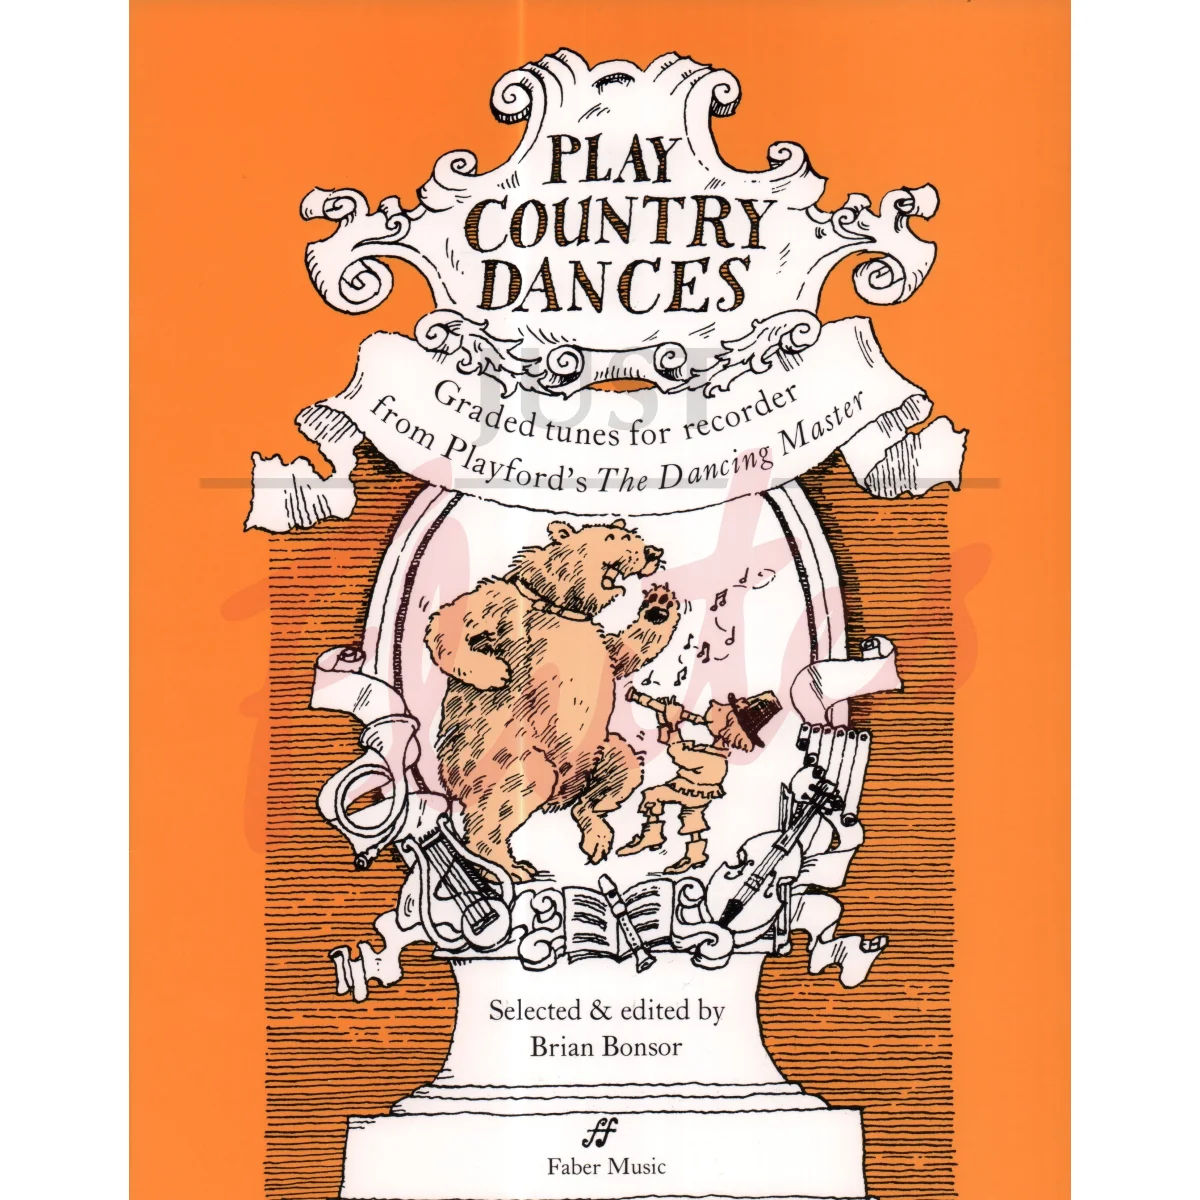 Play Country Dances - Graded Tunes for Descant Recorder